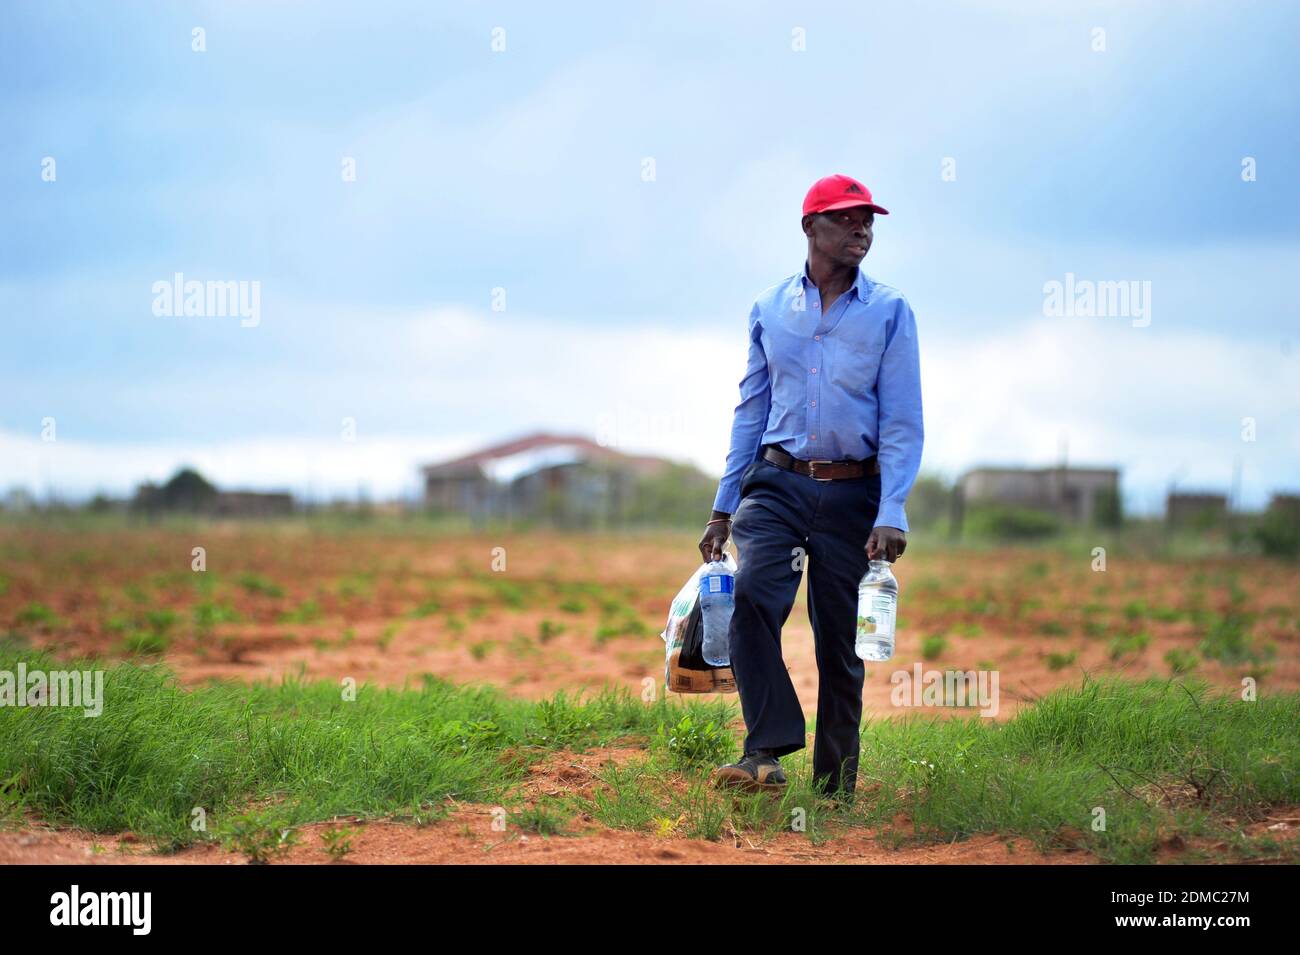 Subsistence farmers in South Africa's rural areas like Limpopo work the land during the rainy season to feed their families. Stock Photo